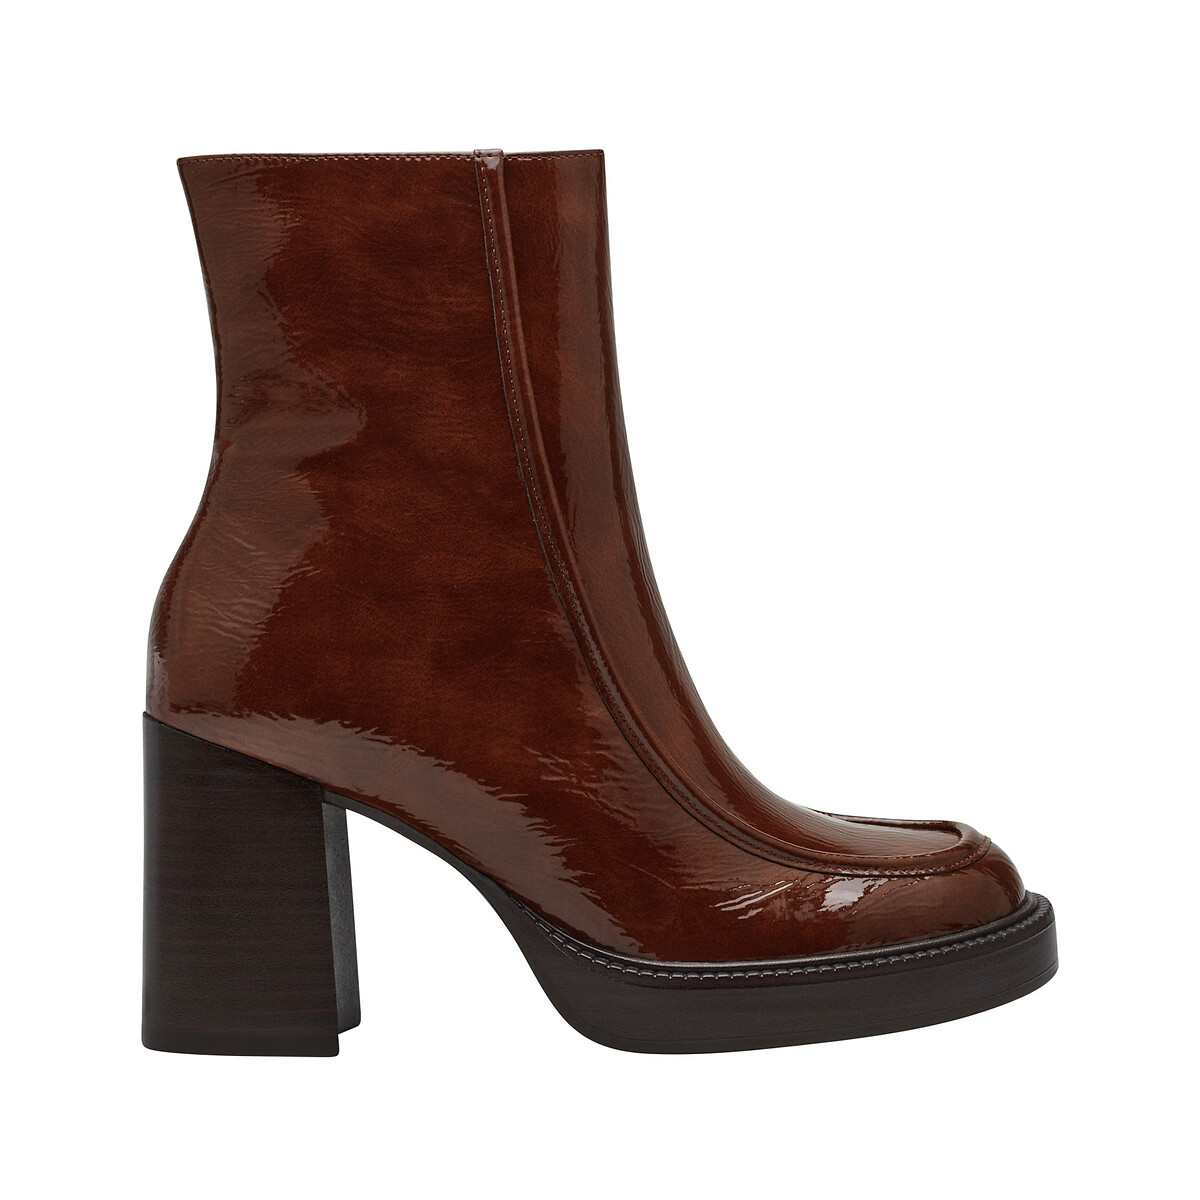 square toe ankle boots with heel